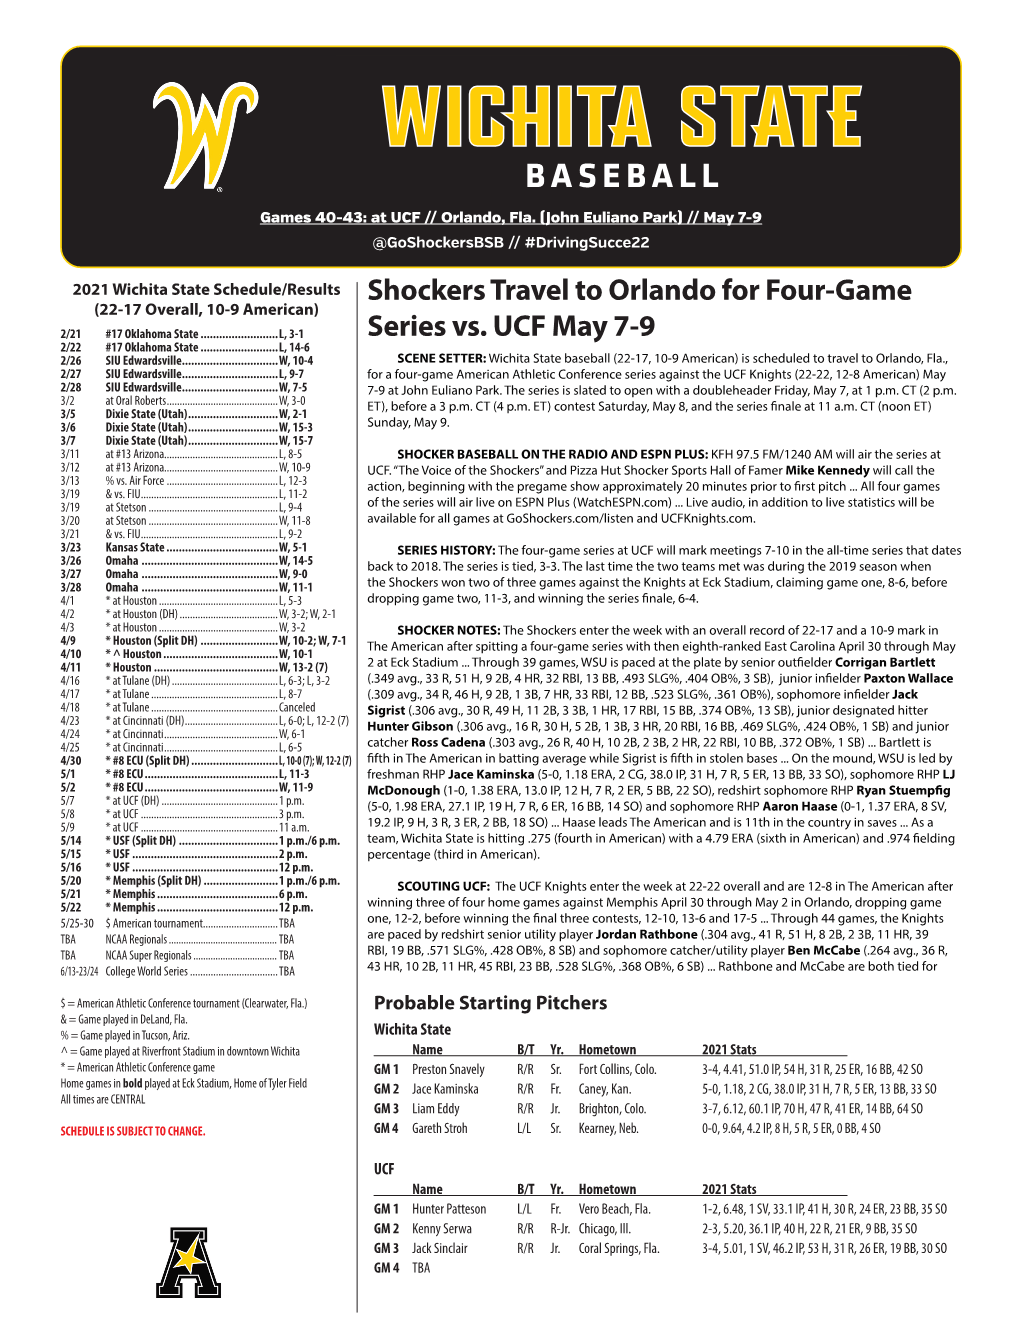 Shockers Travel to Orlando for Four-Game Series Vs. UCF May